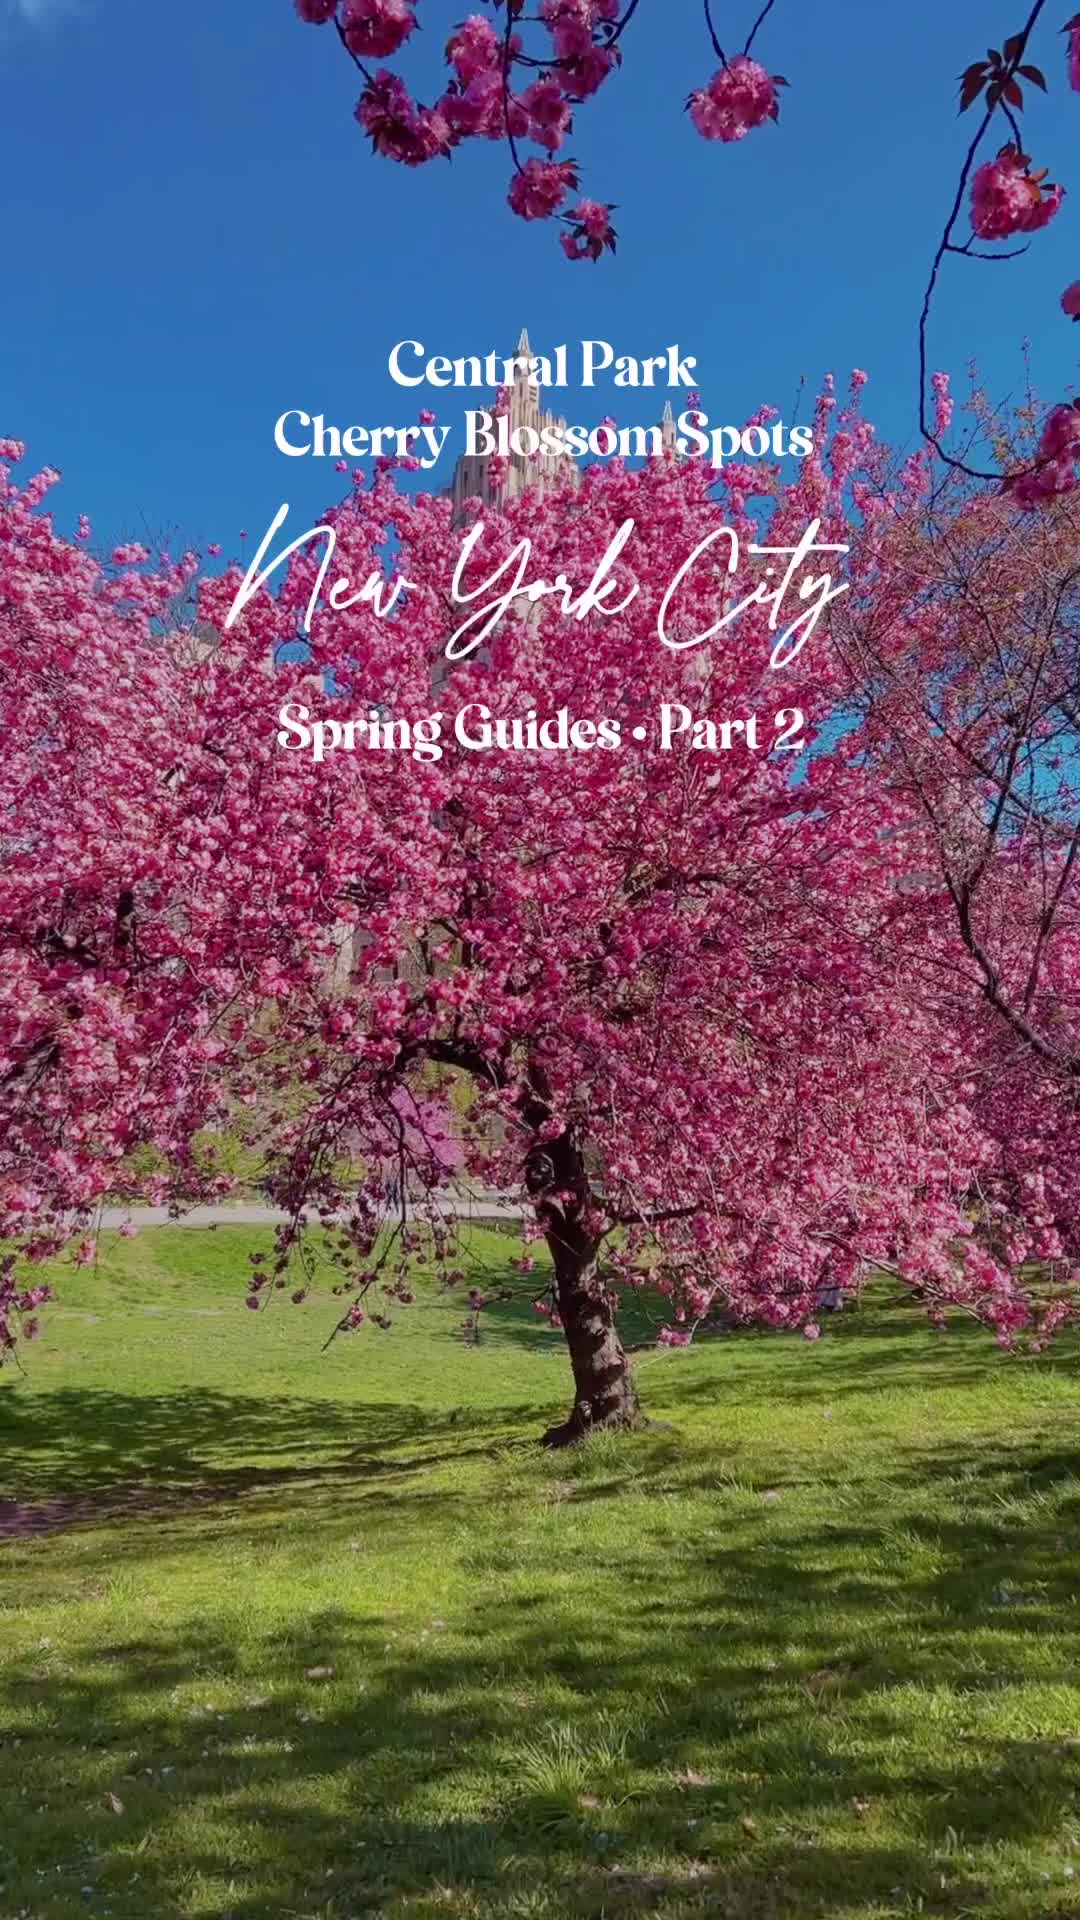 NYC Spring Guide: Best Cherry Blossom Spots in Central Park